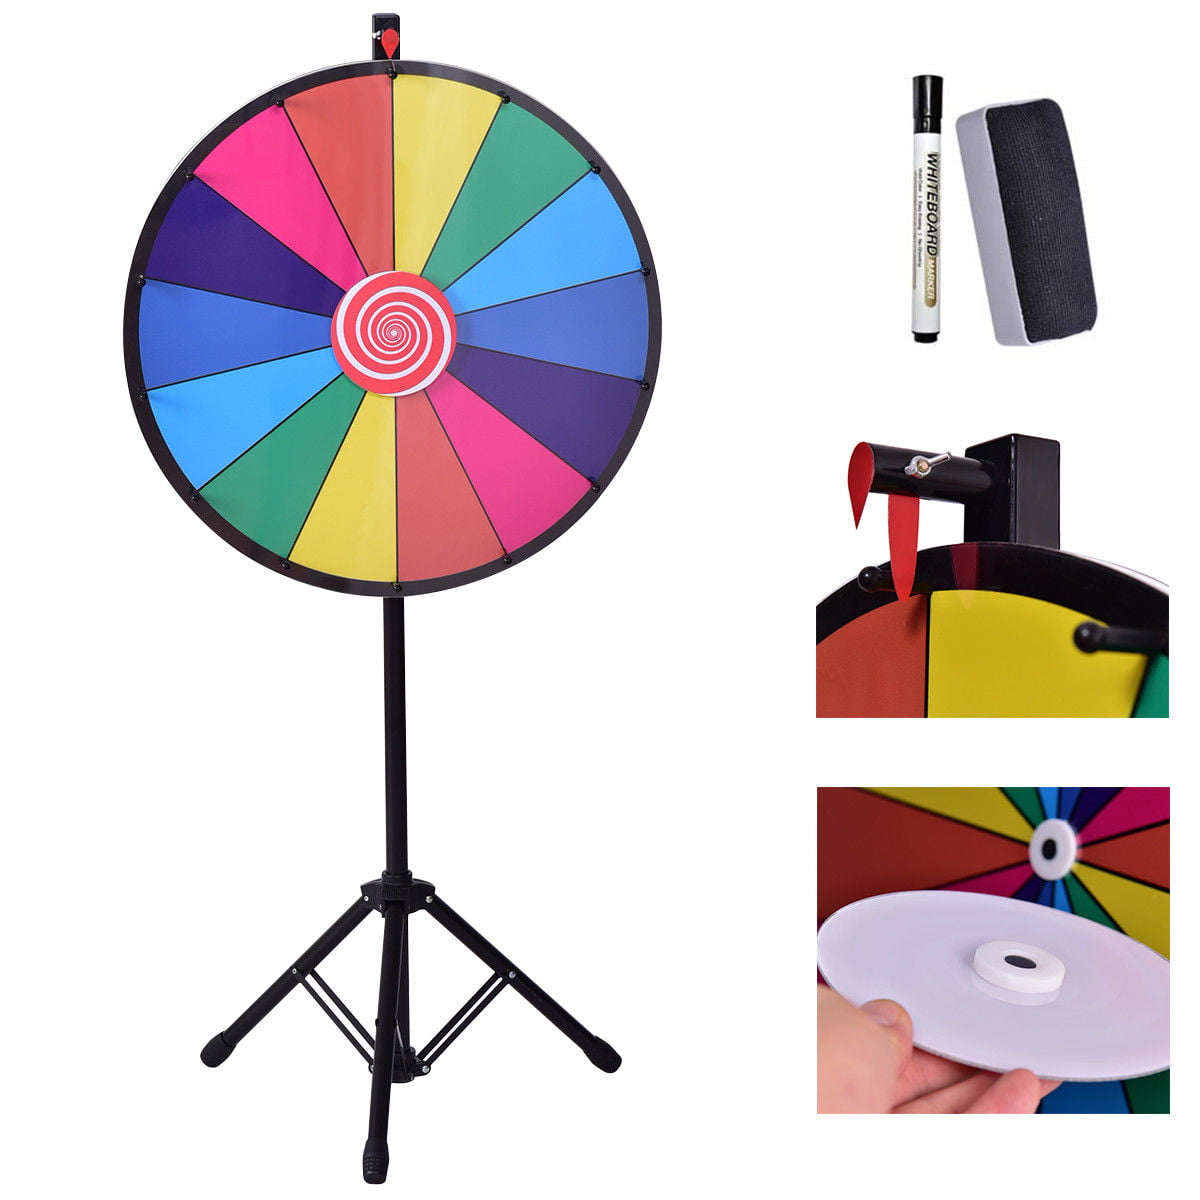 24" Color Prize Wheel Fortune Tripod Spinning Game Upgraded Editable HOT SALE 